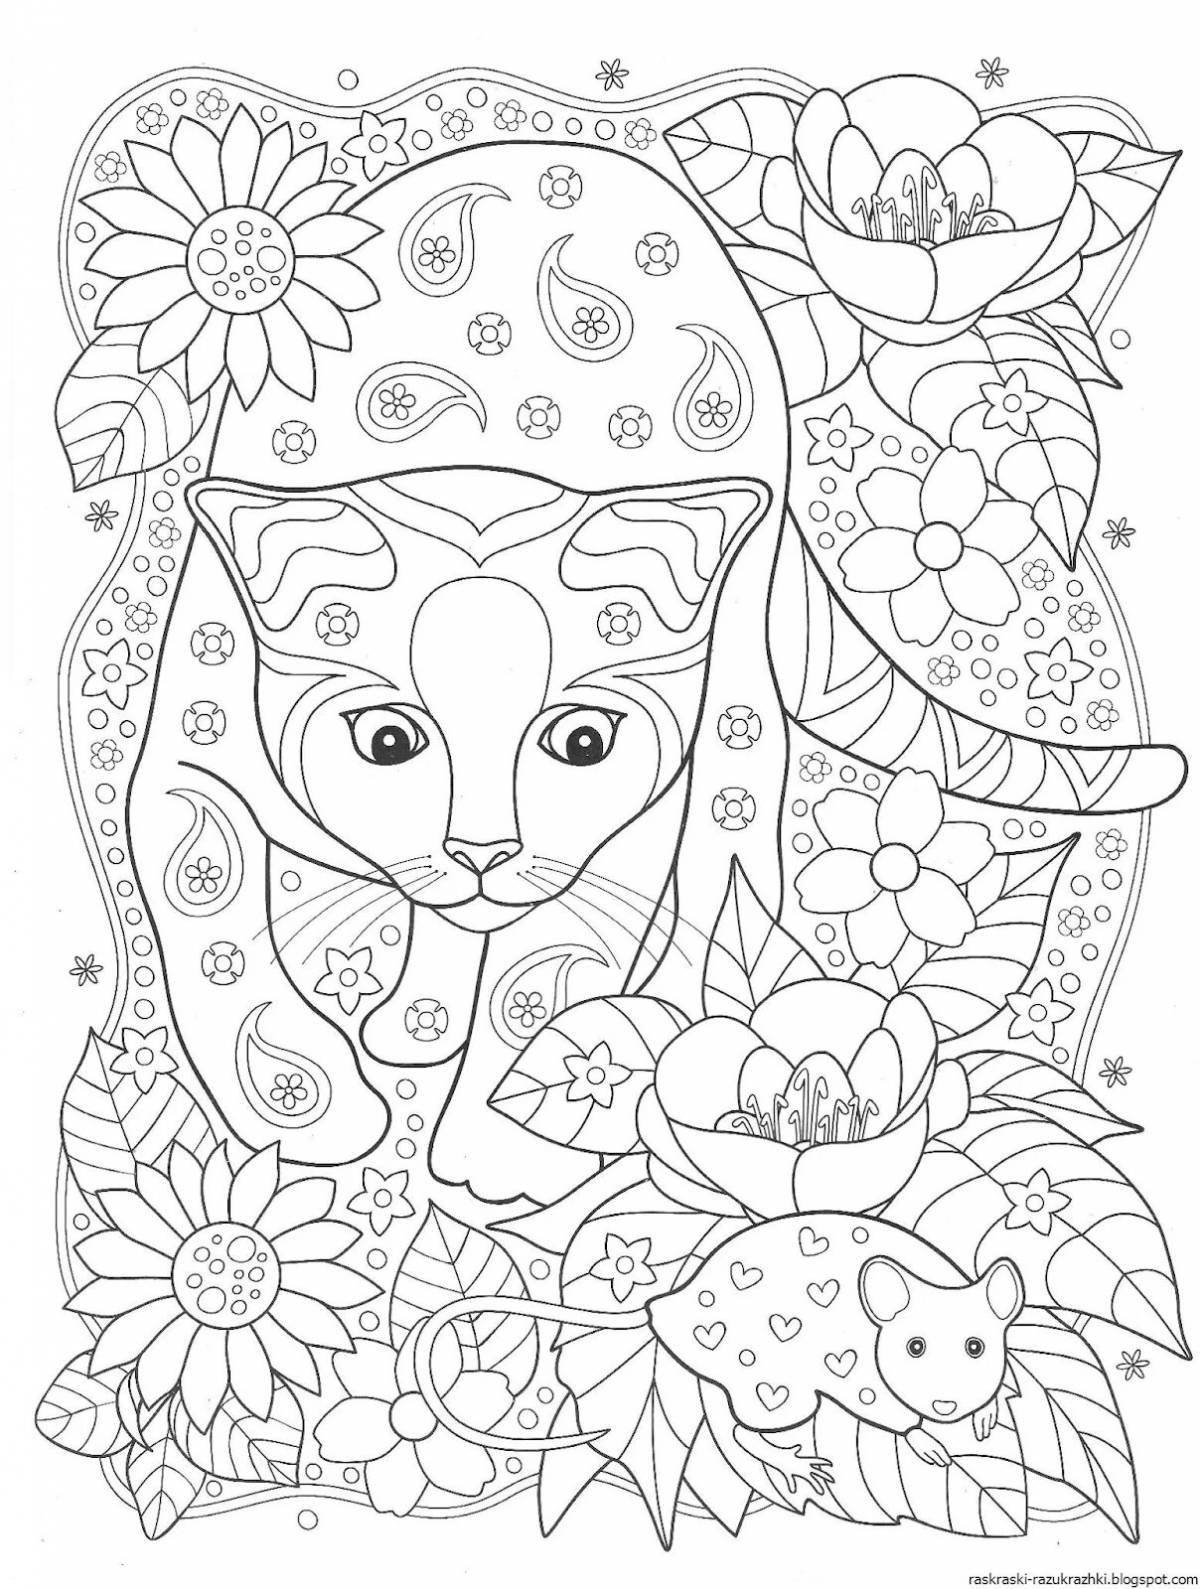 Difficult coloring book for 8 year old girls